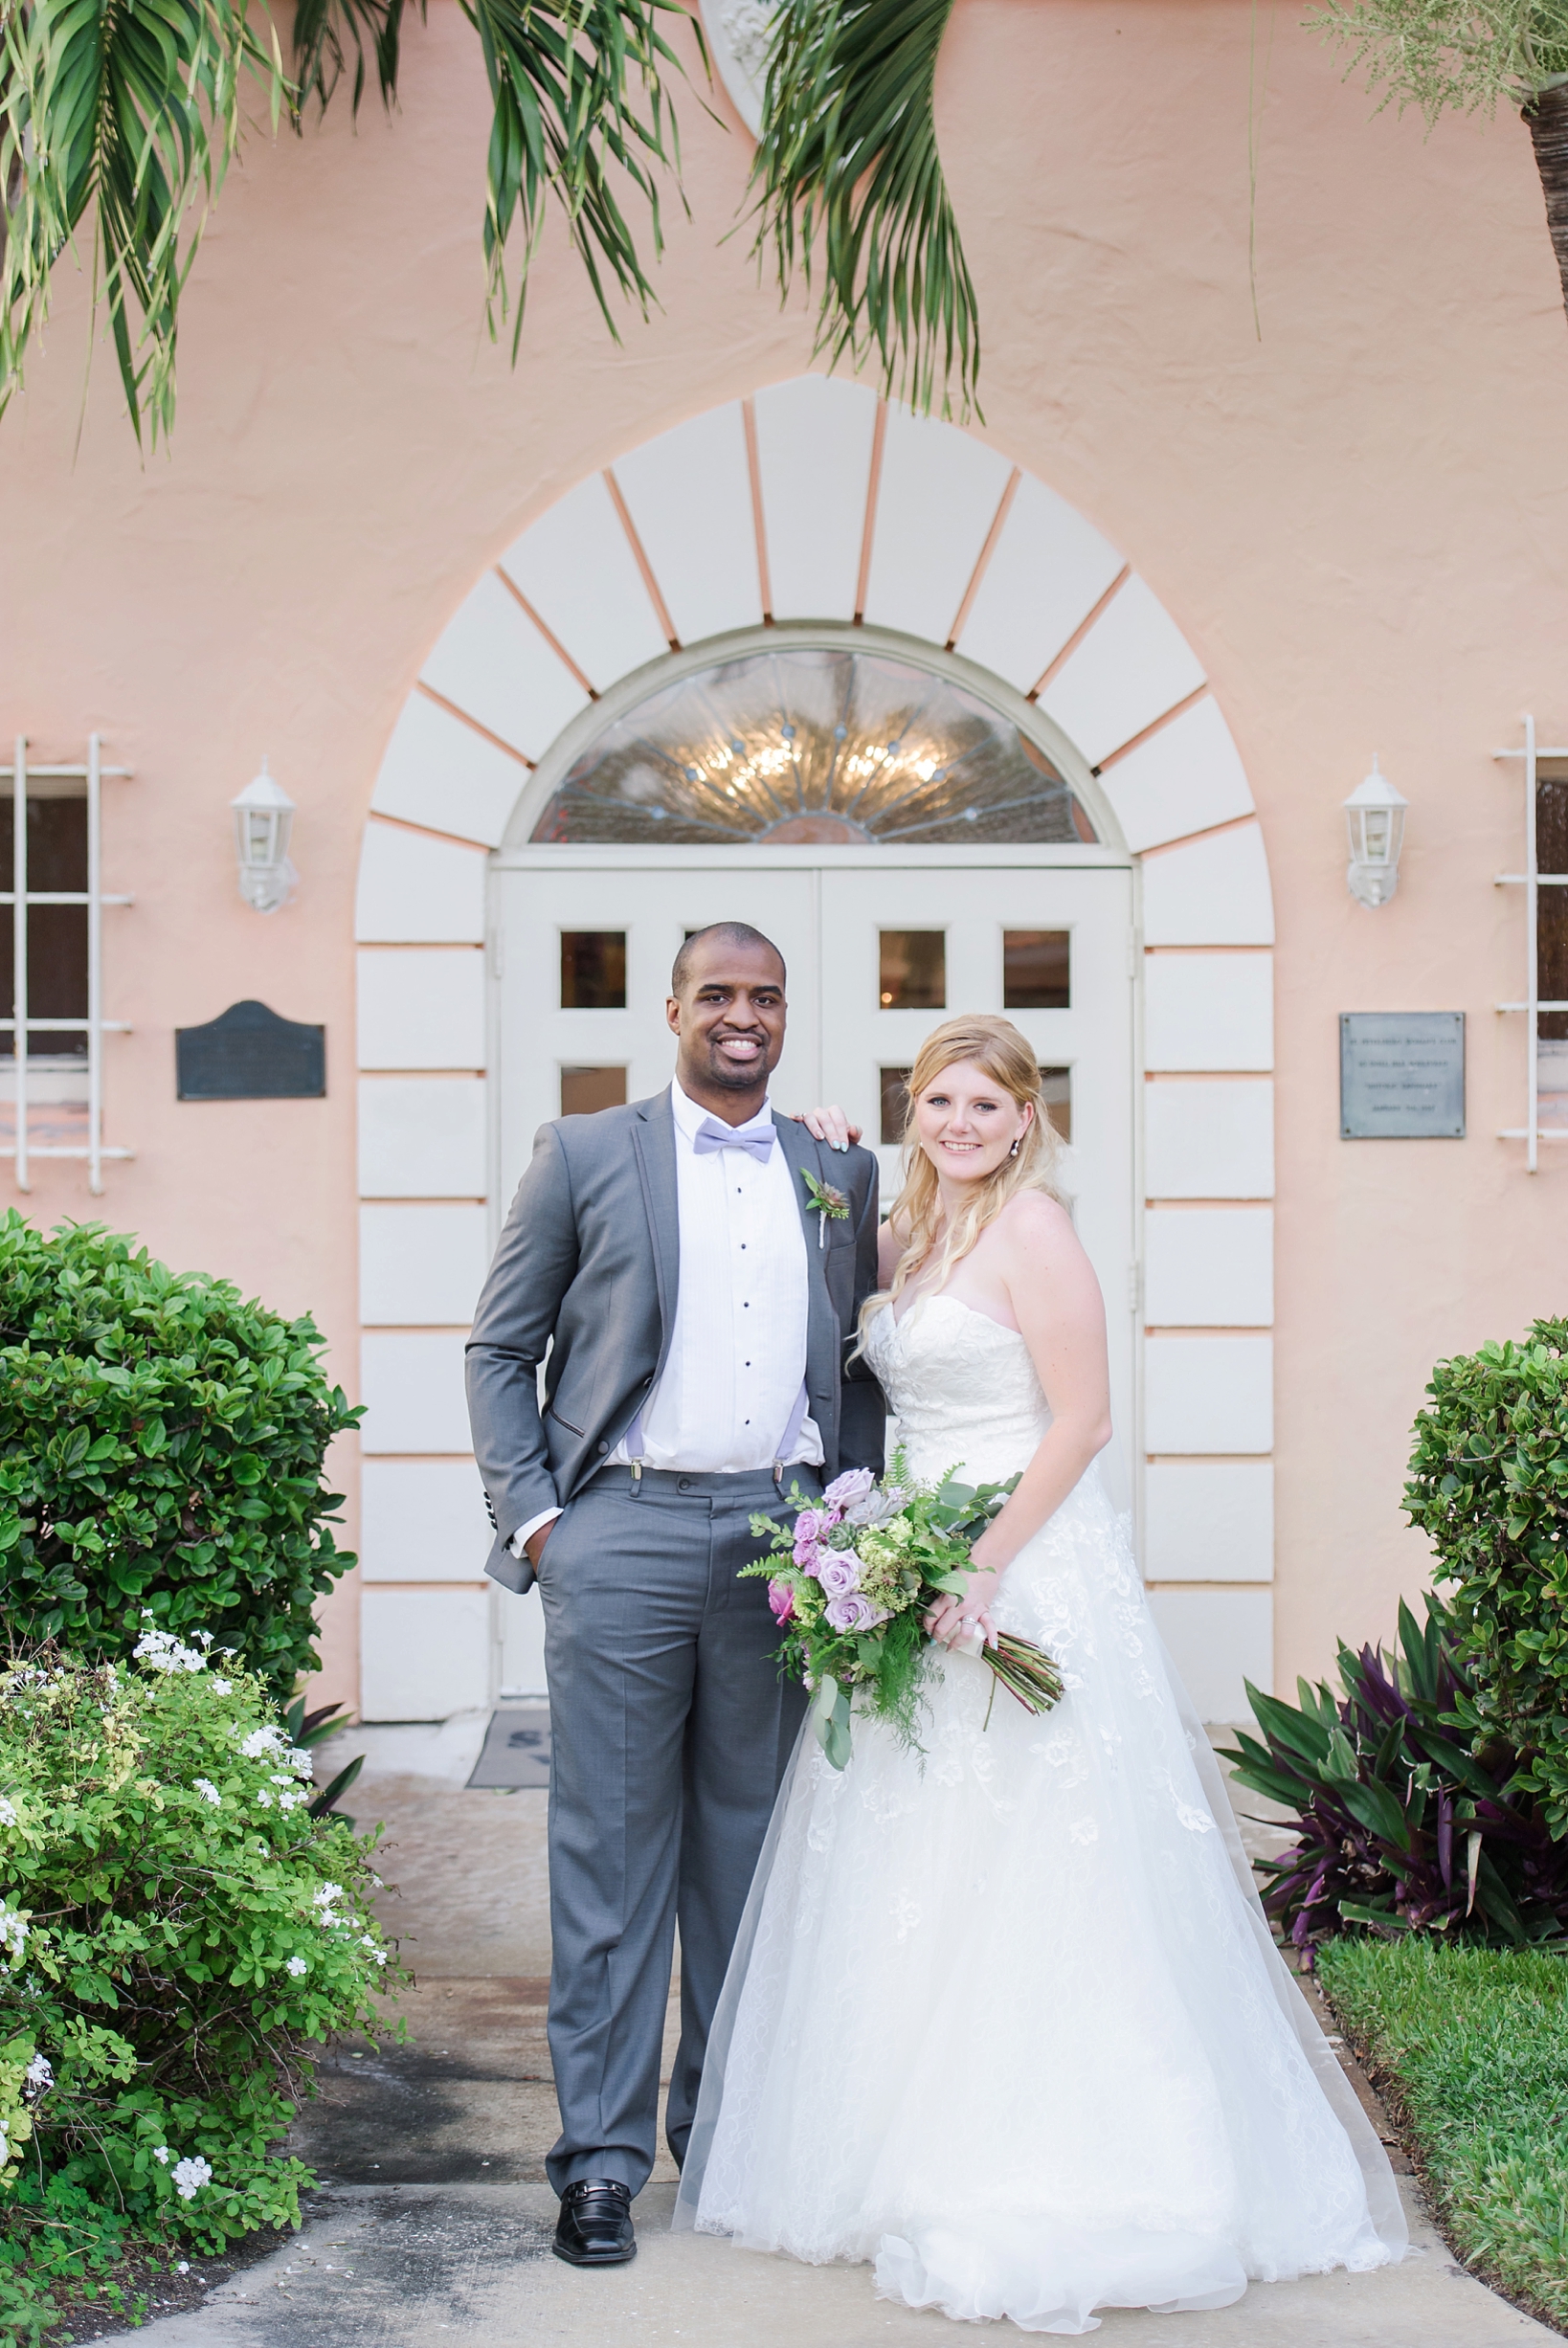 Timeless portrait of the Bride and Groom in front of the reception building